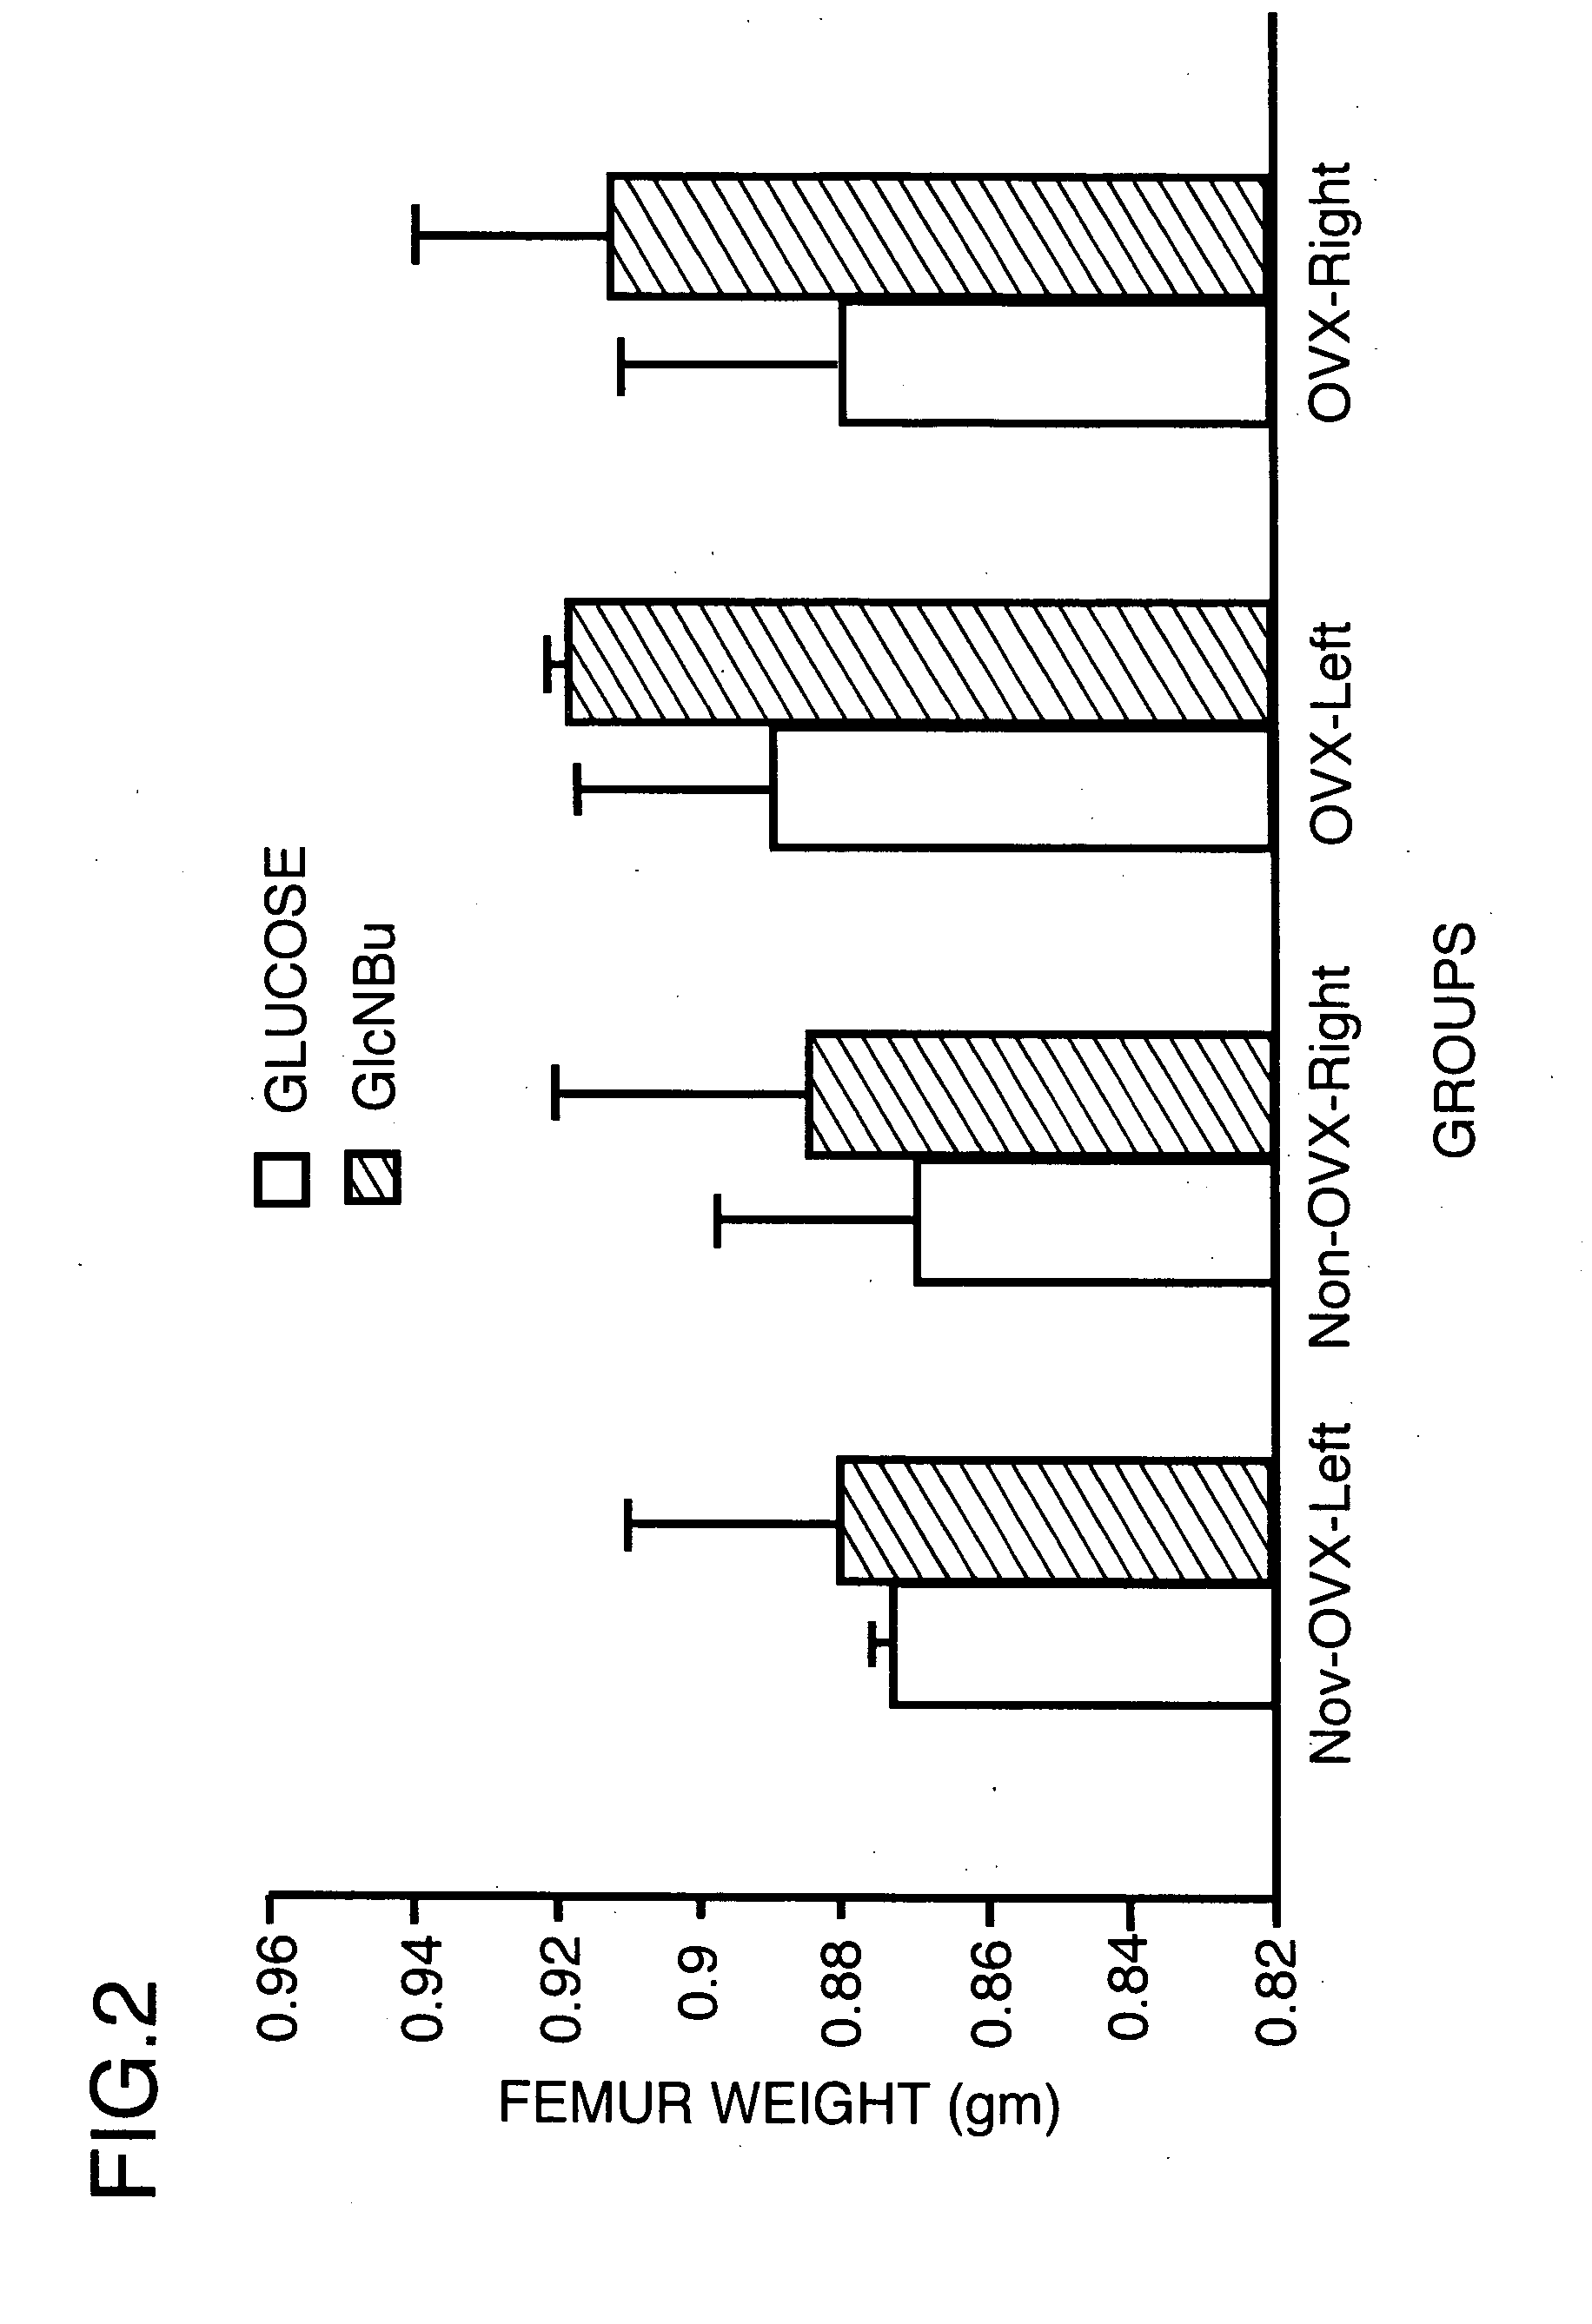 Method for increasing the bone mineral density and bone micro-architecture or connectivity of a mammal using N-acylated glucosamines